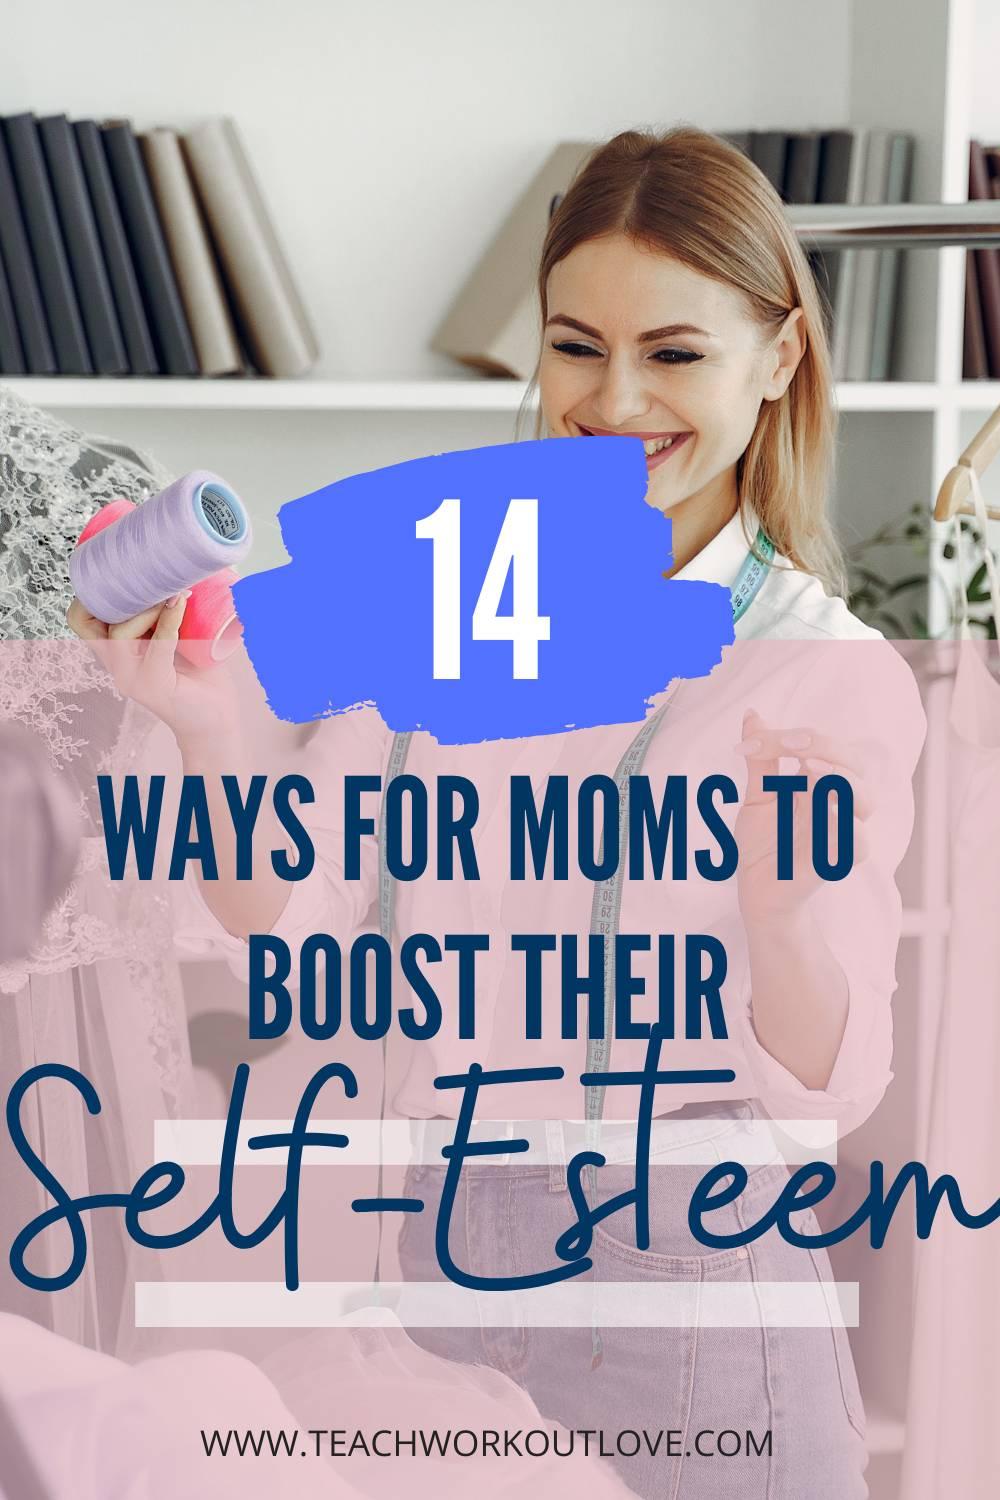 As new parents, you might have been more focused on your baby than yourself over the past few months. Now it's time to focus on you! Here are 14 ways for moms to boost their self-esteem: